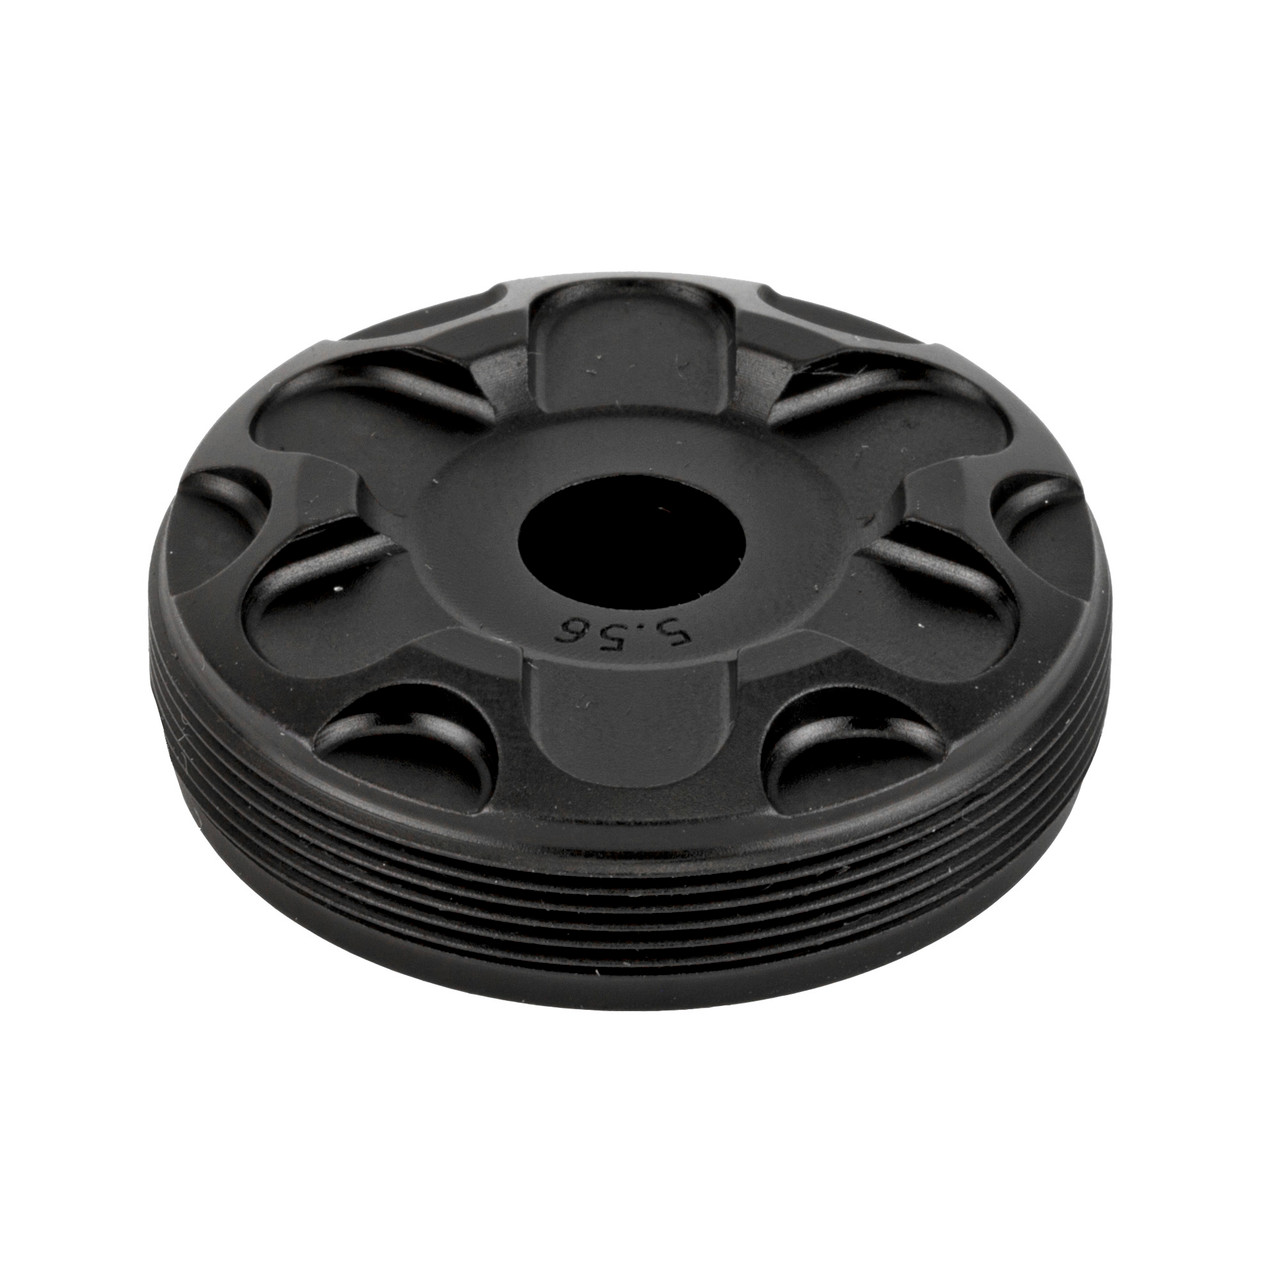 Rugged Front Cap For Rugged Suppressor 5.56